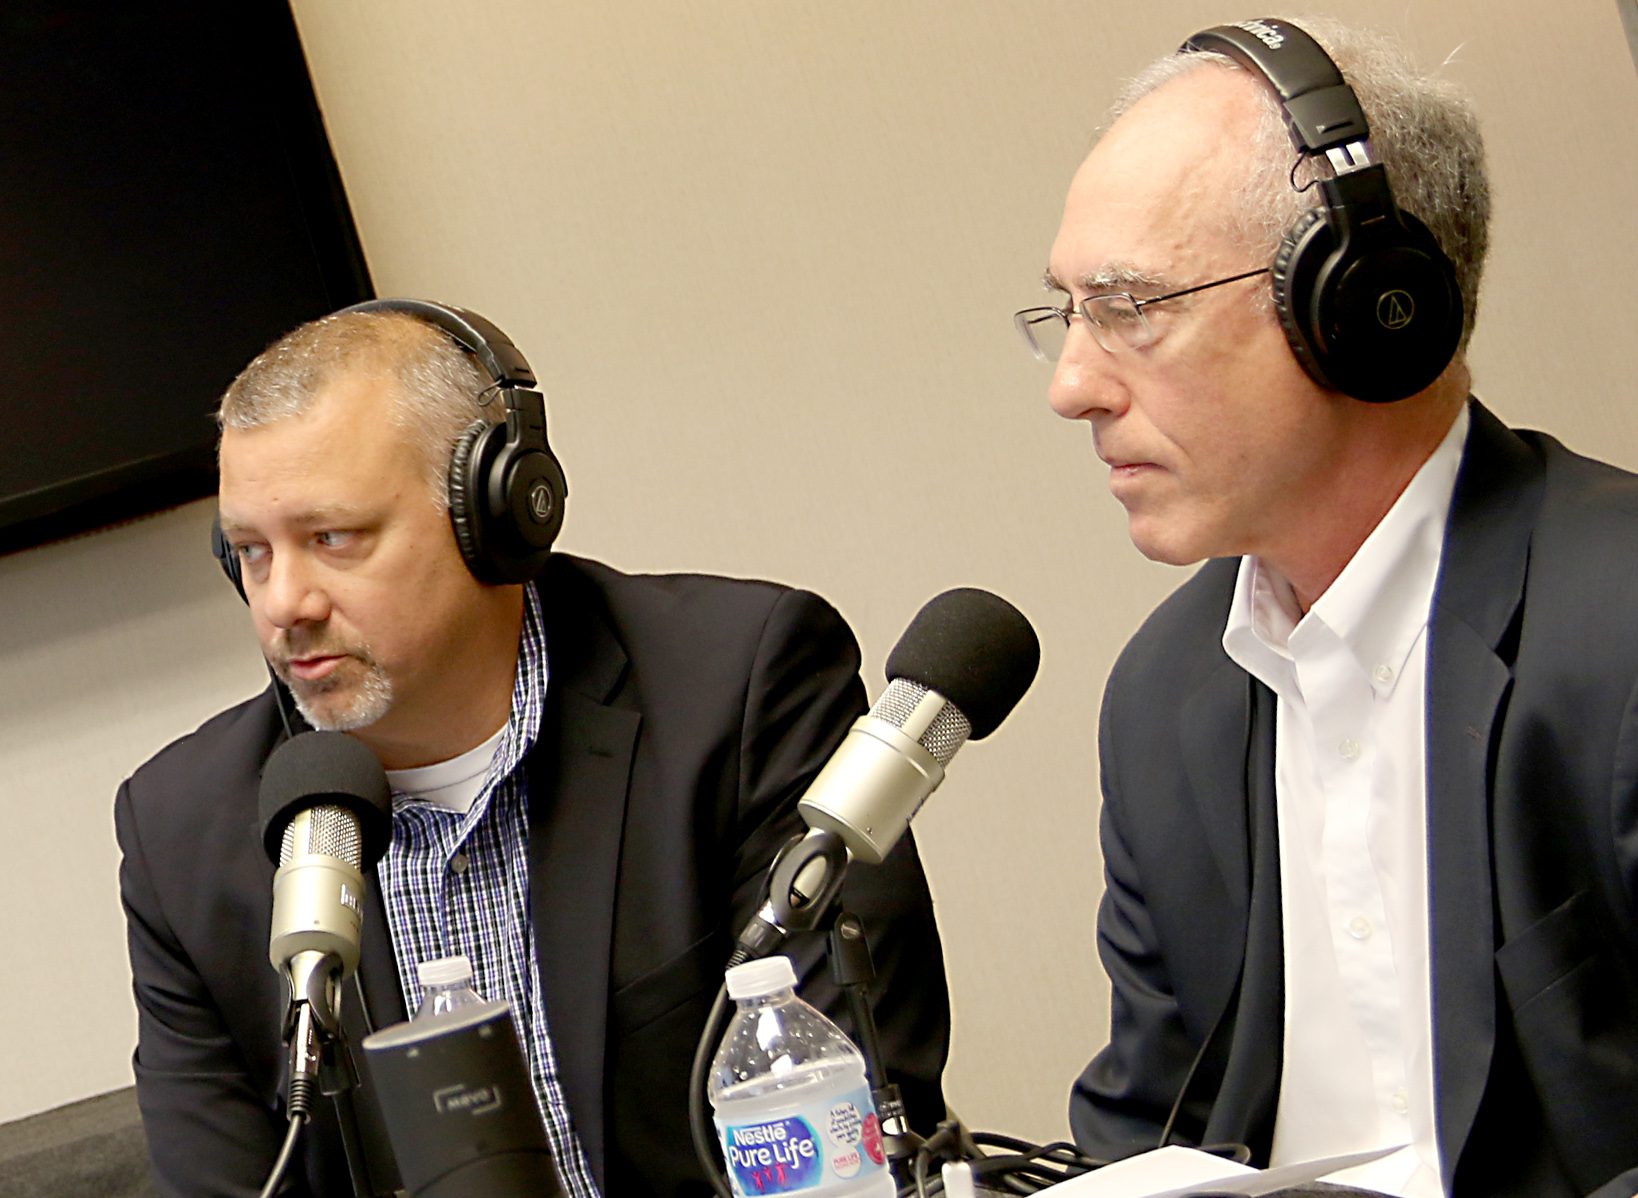 Paul Gregory & Andy Gelfand | Podcast Interview | Ohio Business Podcast